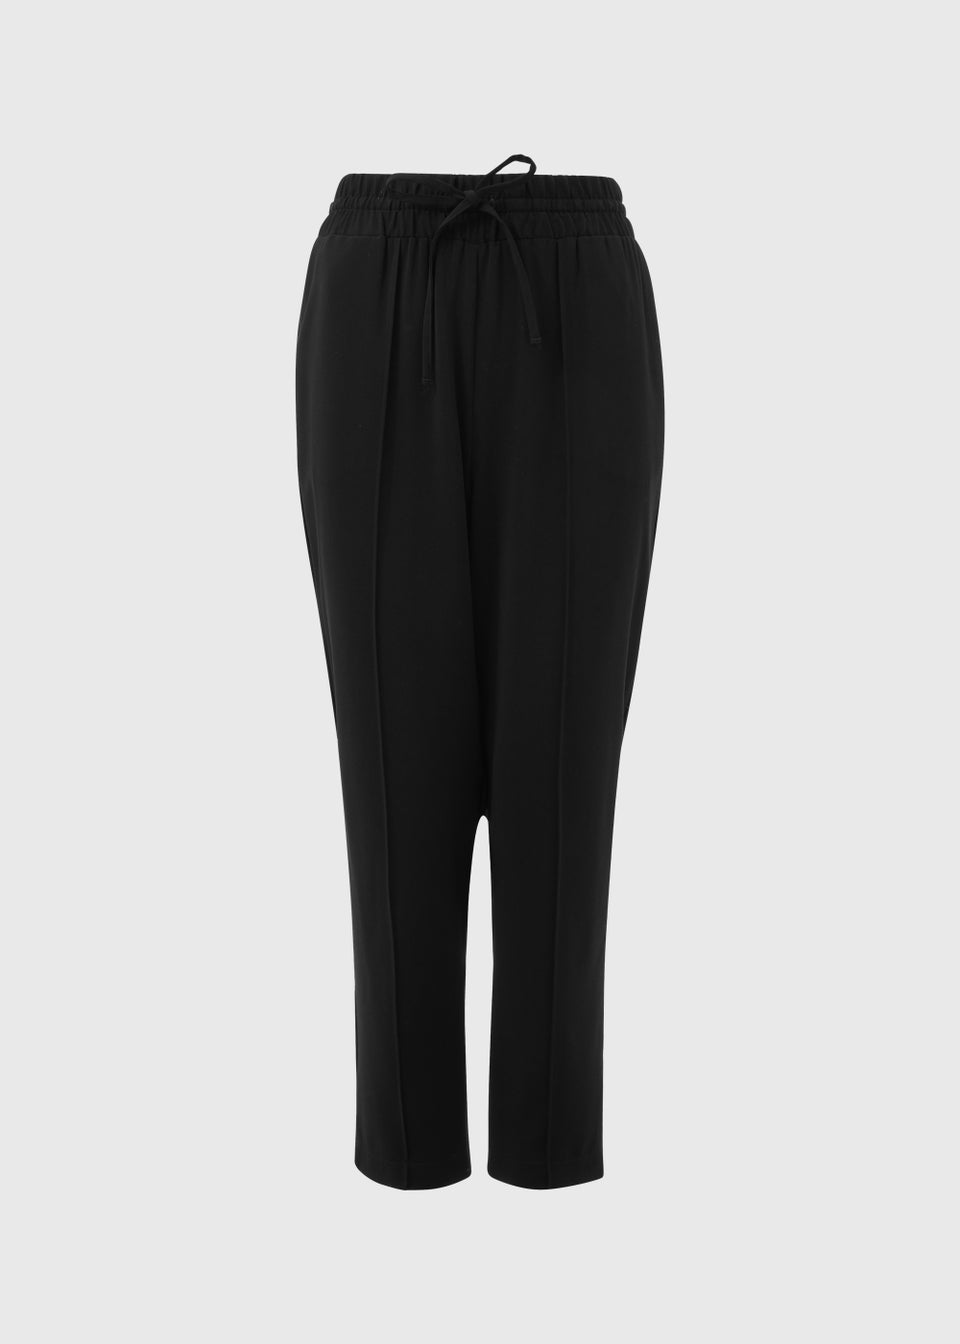 Et Vous Black Tapered Trousers